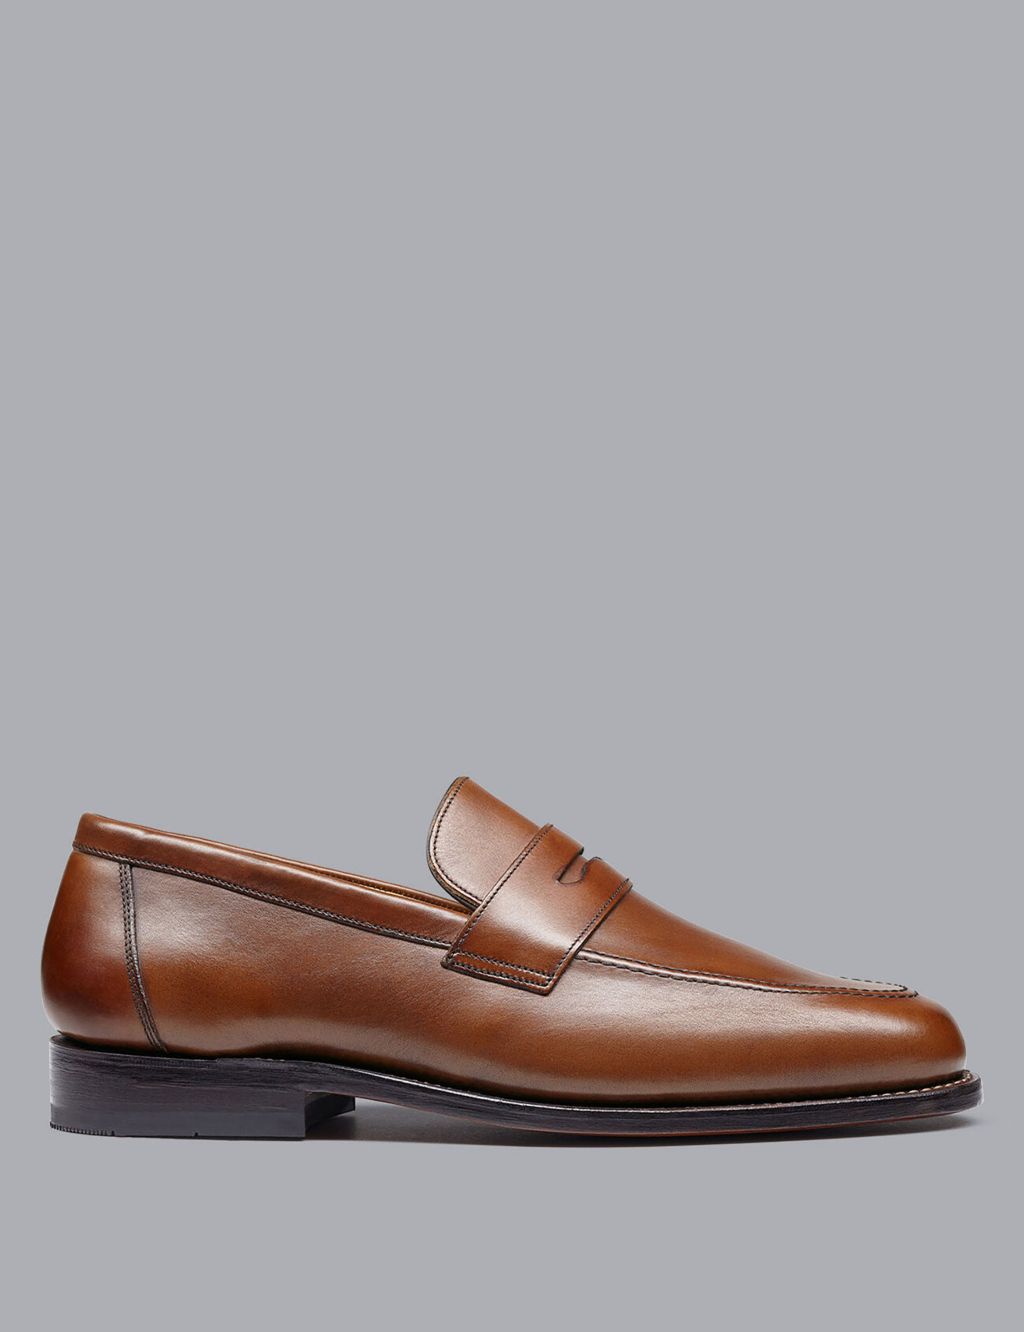 Leather Slip On Loafers